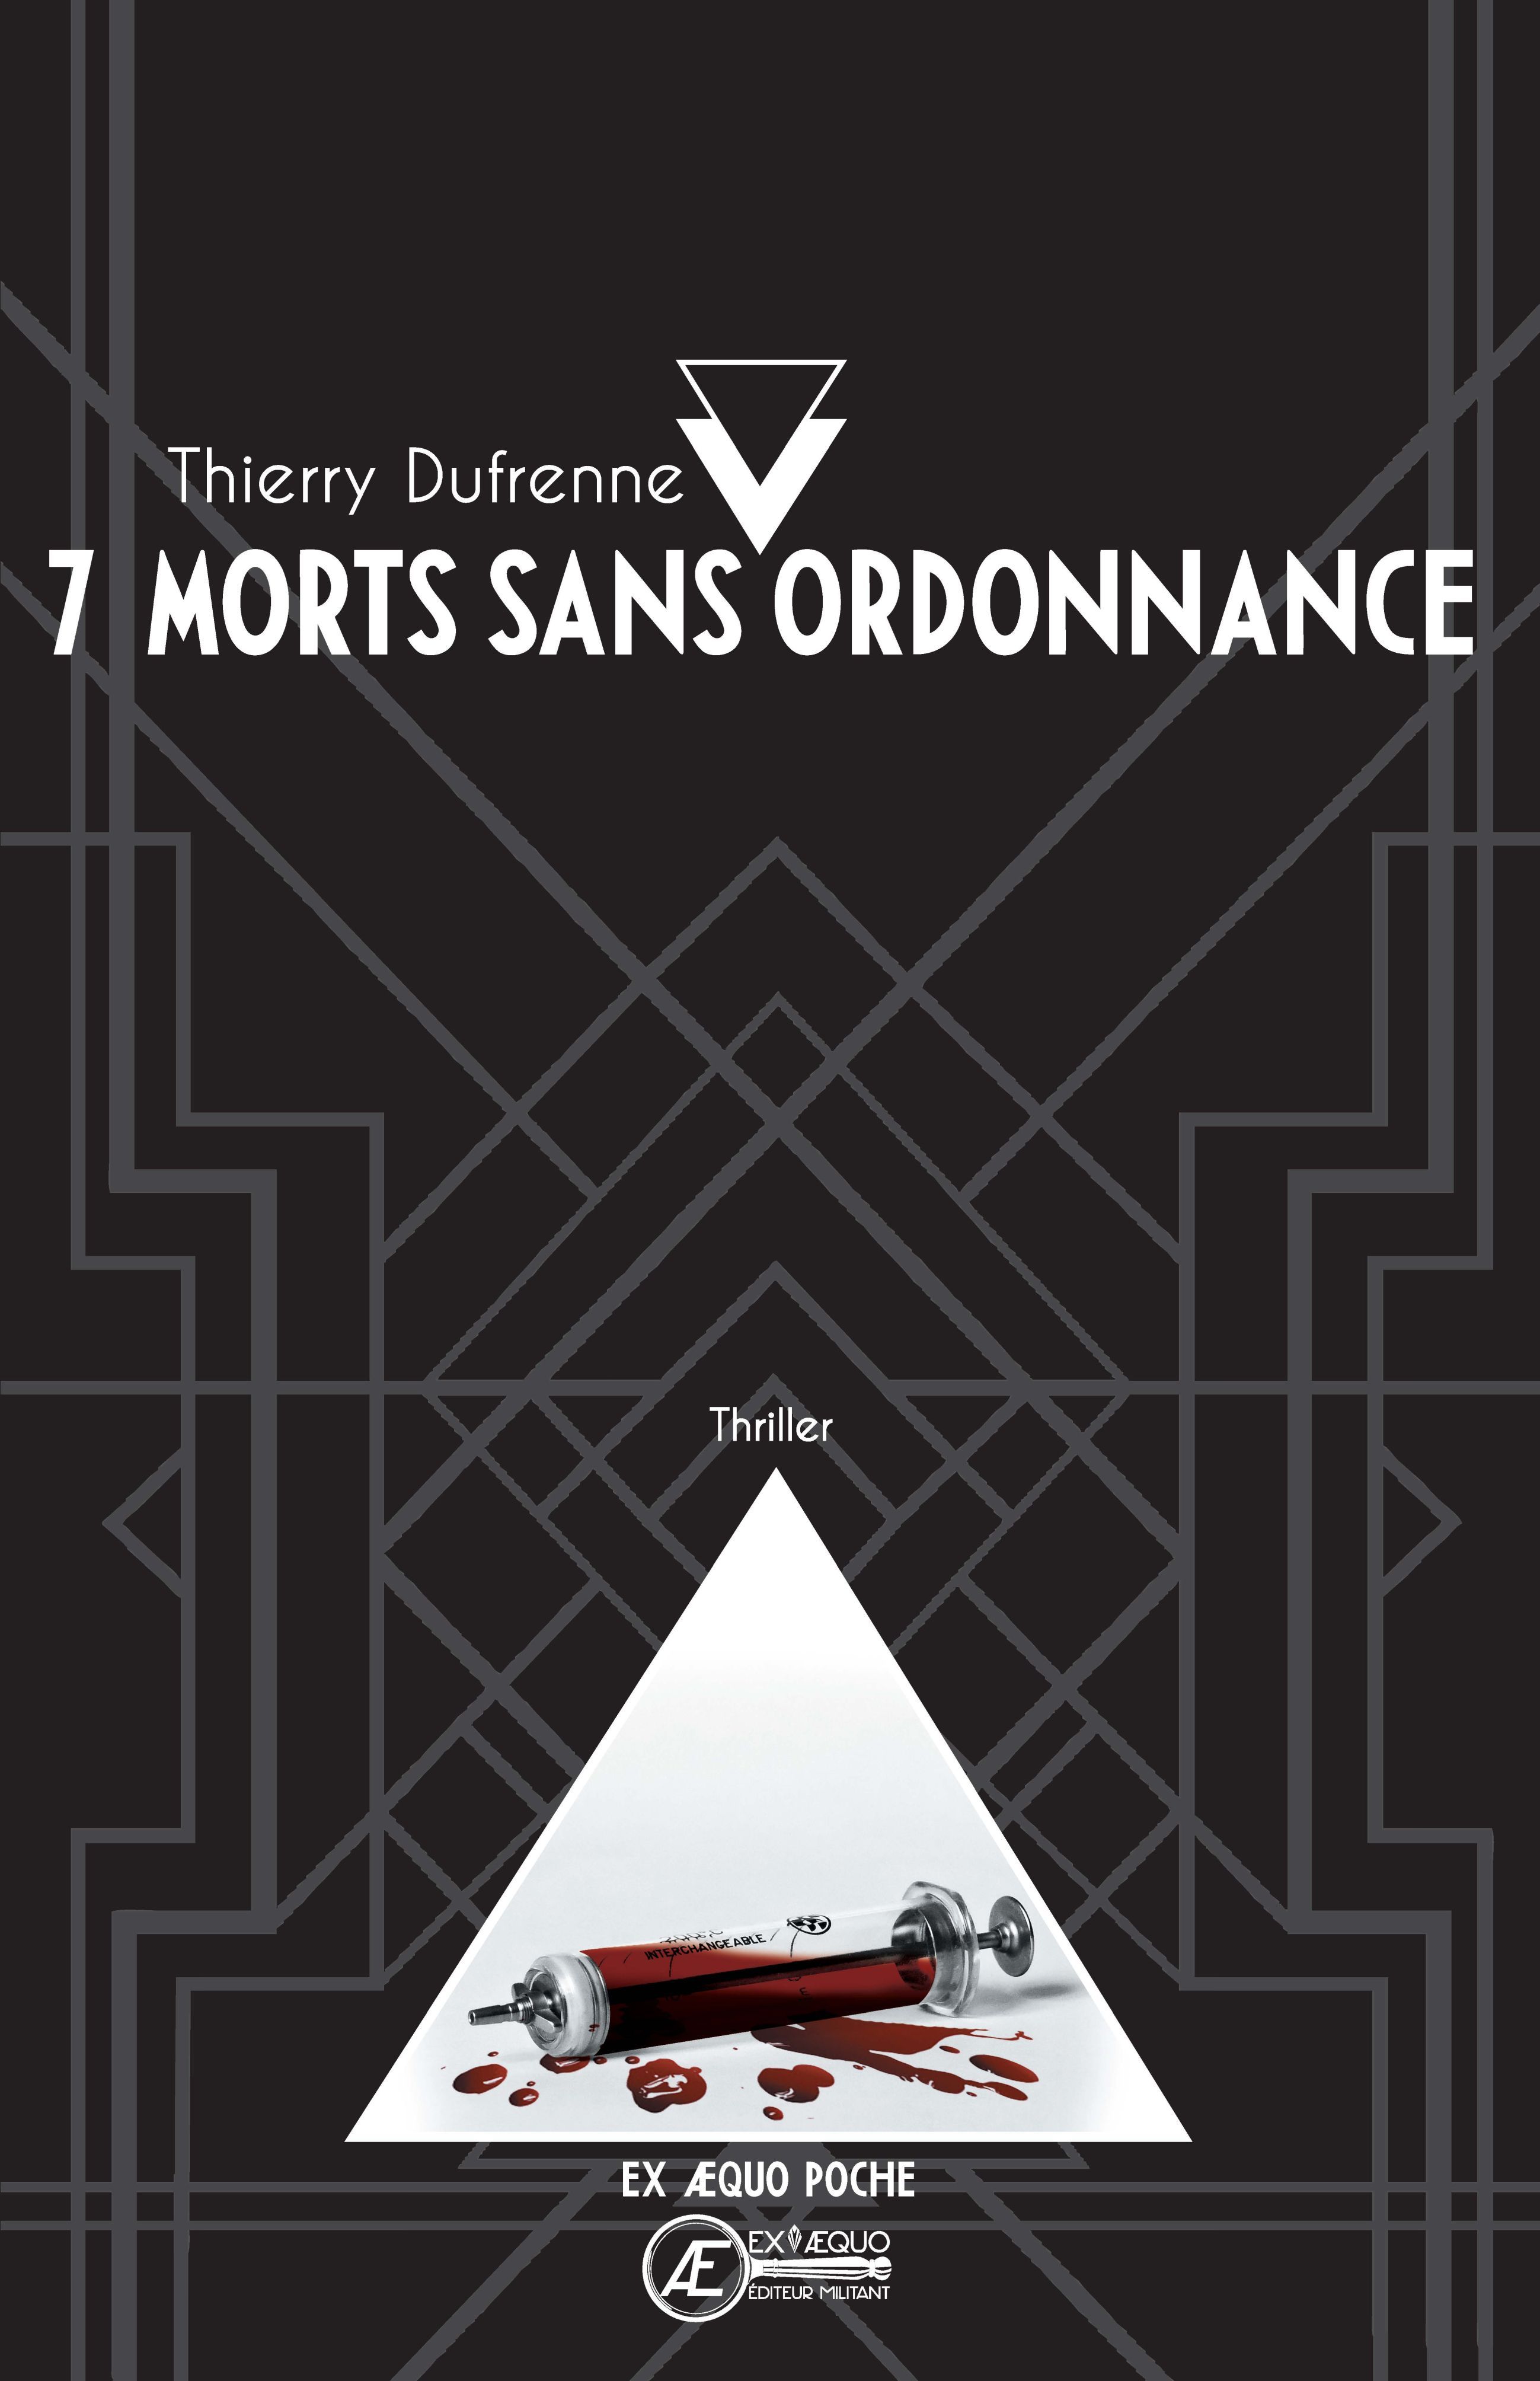 You are currently viewing 7 morts sans ordonnance – Poche, de Thierry Dufrenne